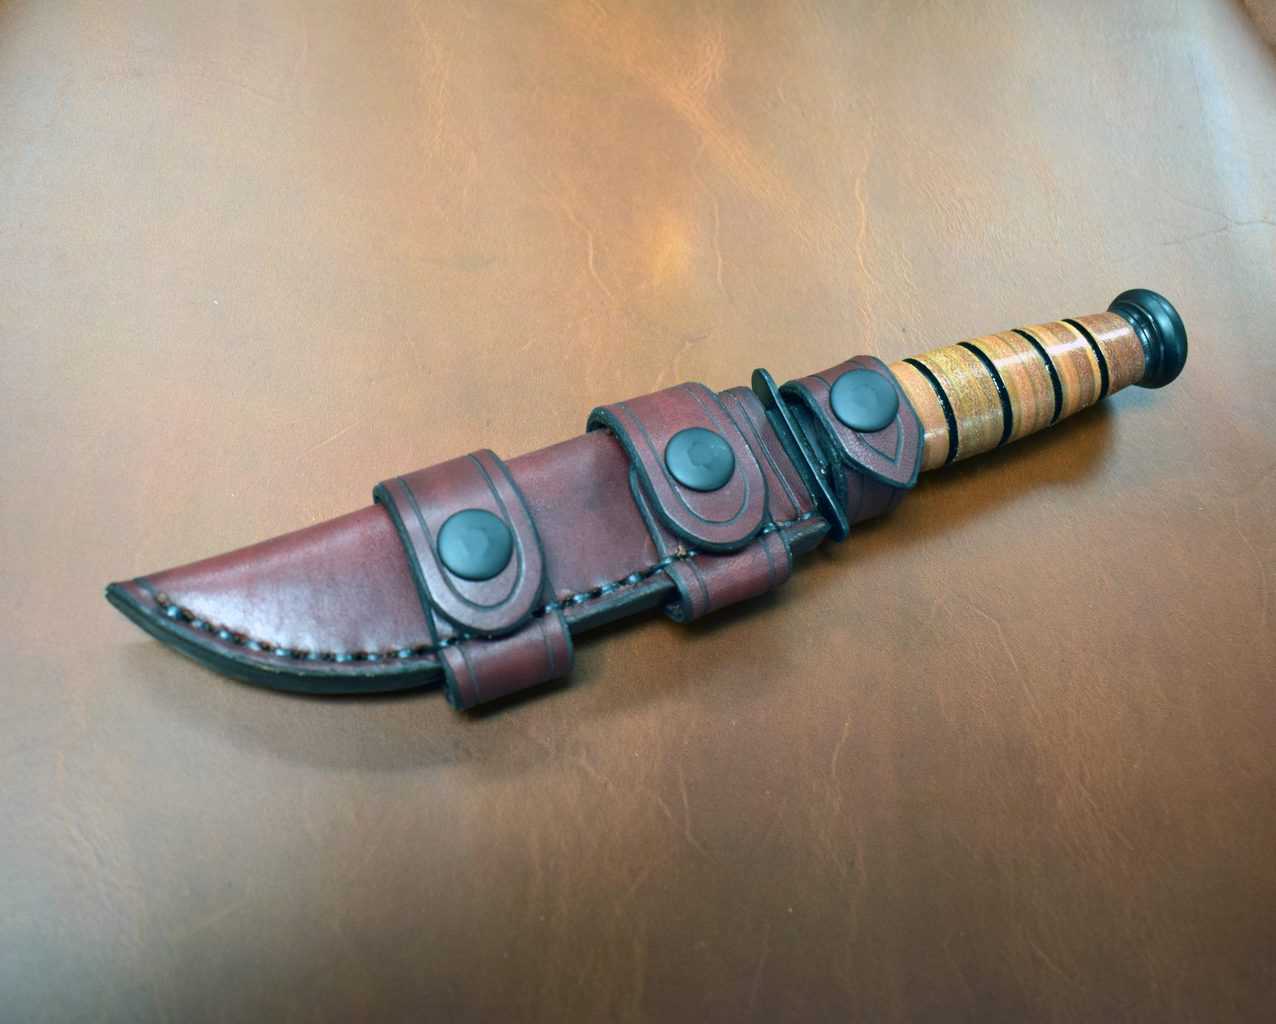 A Short Ka Bar Fighting Knife with a Leather Scout Sheath on a table.